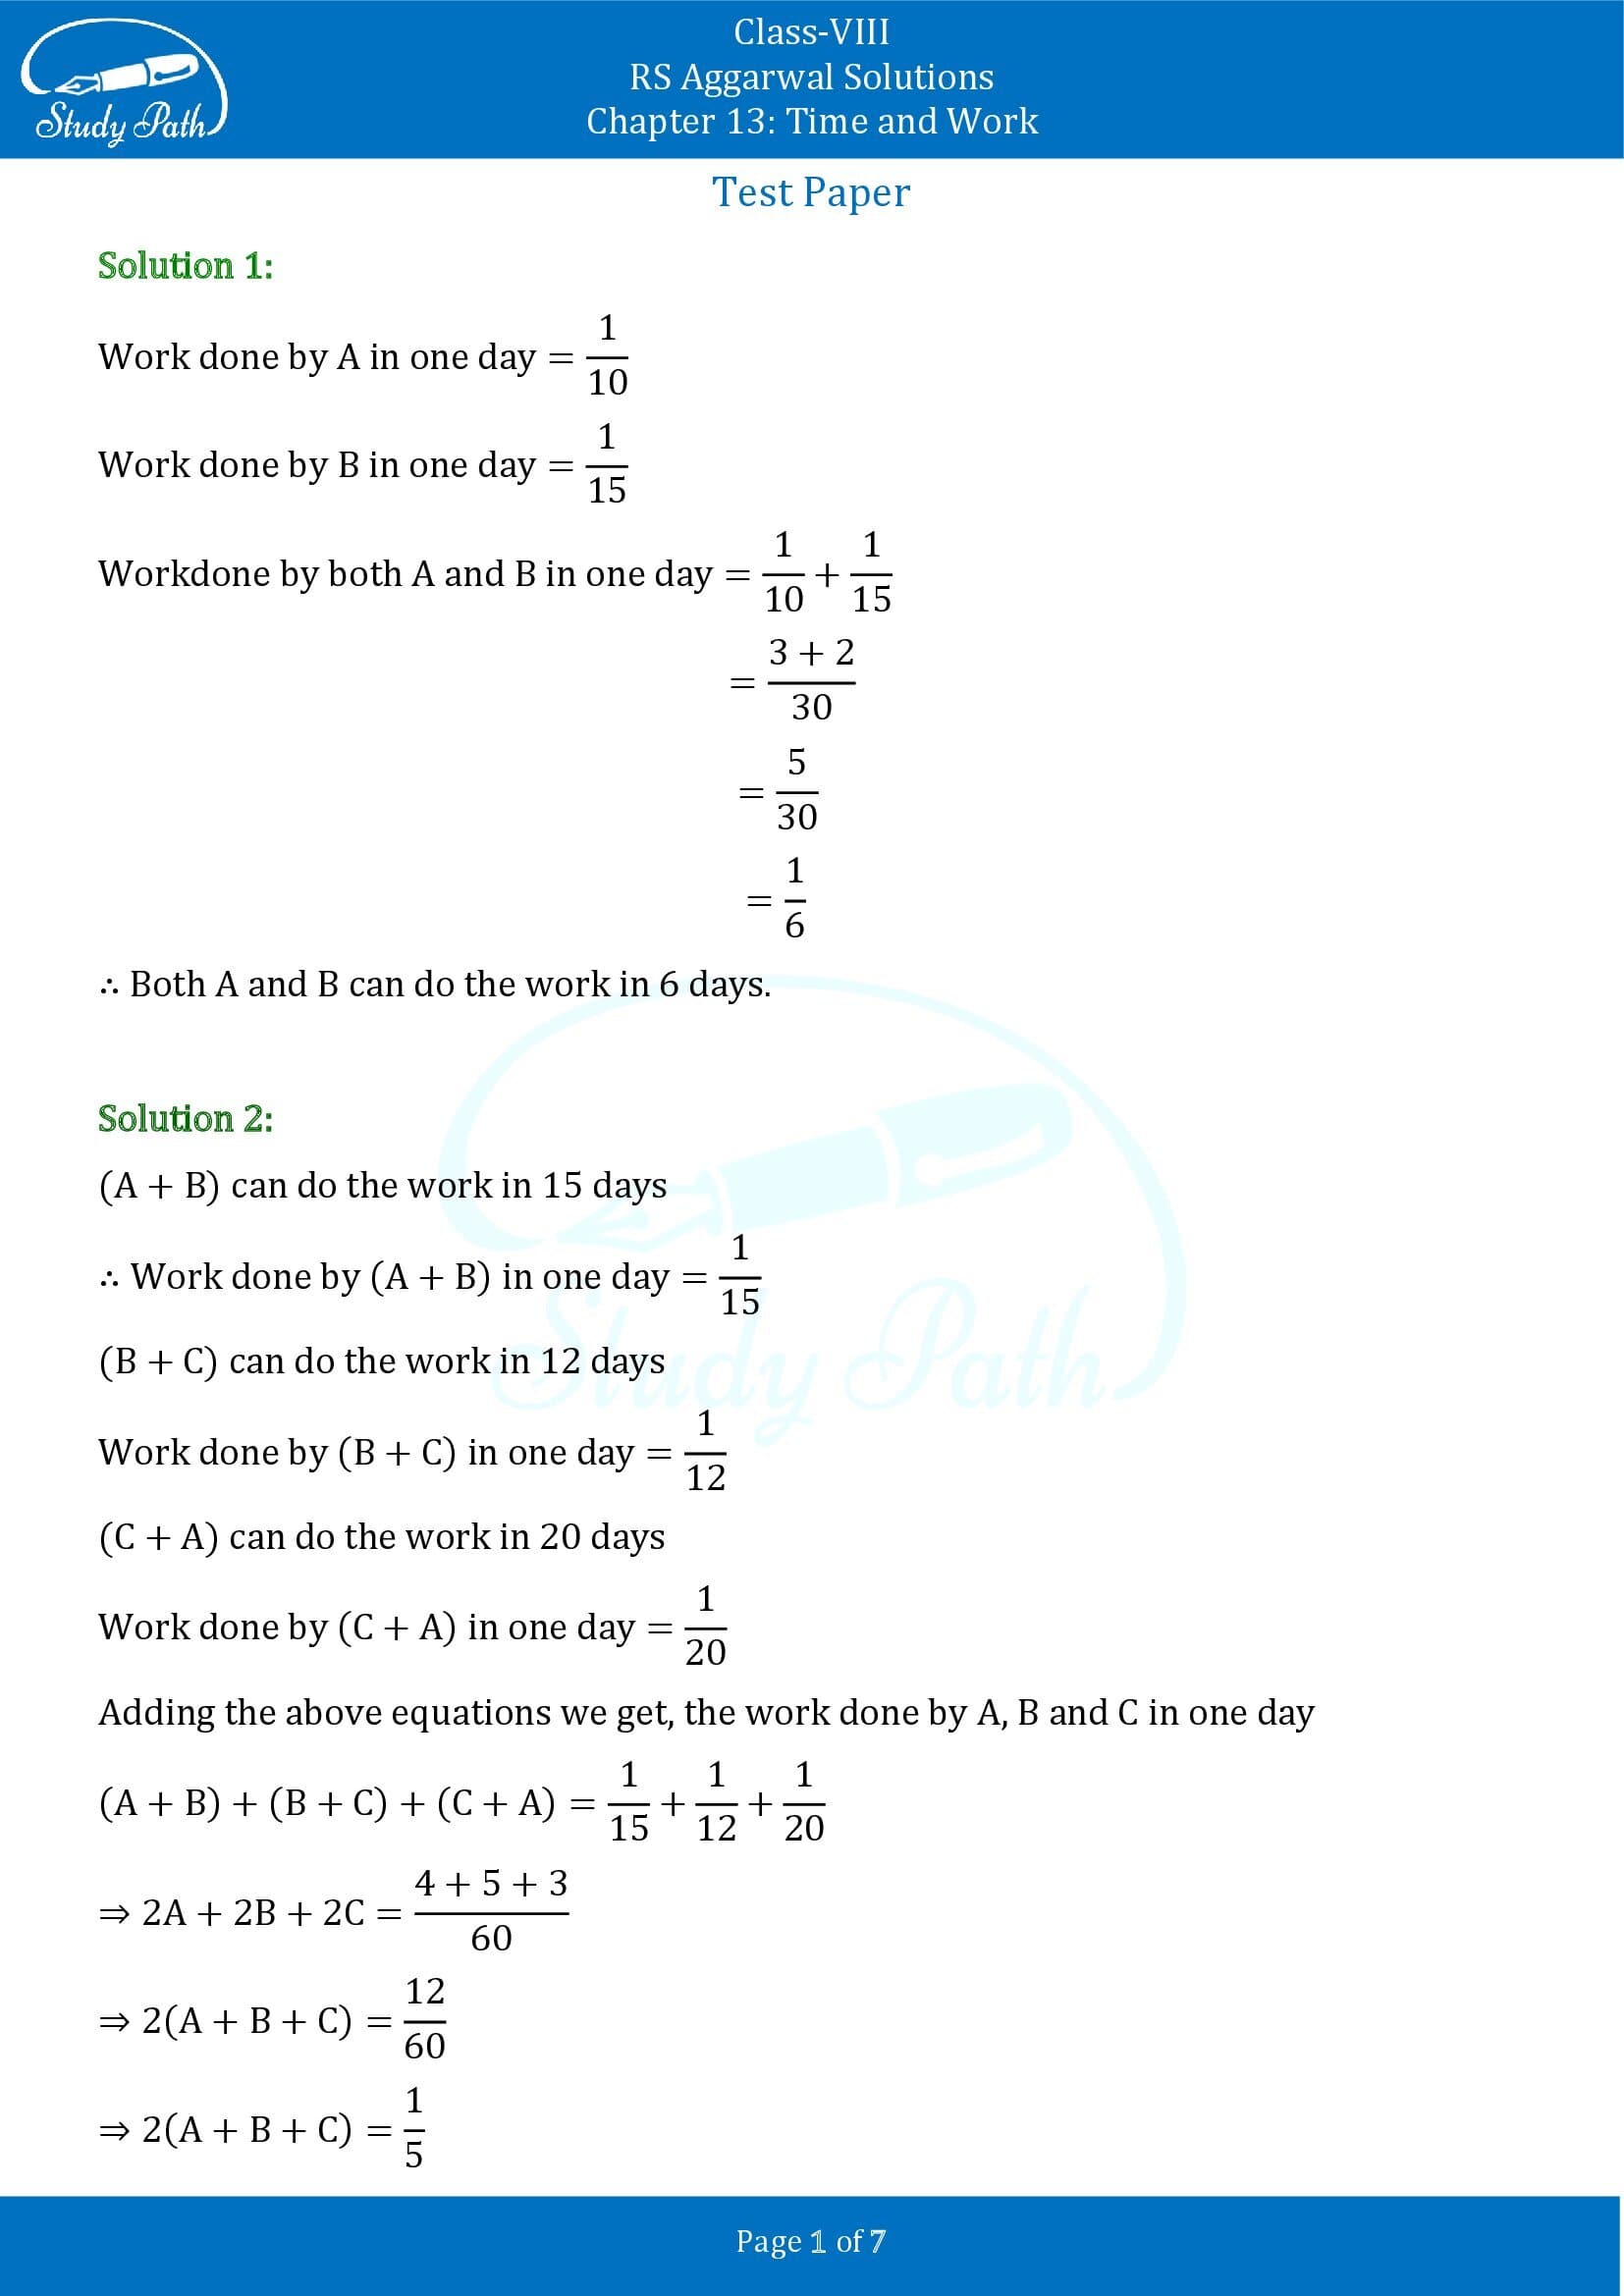 RS Aggarwal Solutions Class 8 Chapter 13 Time and Work Test Paper 00001